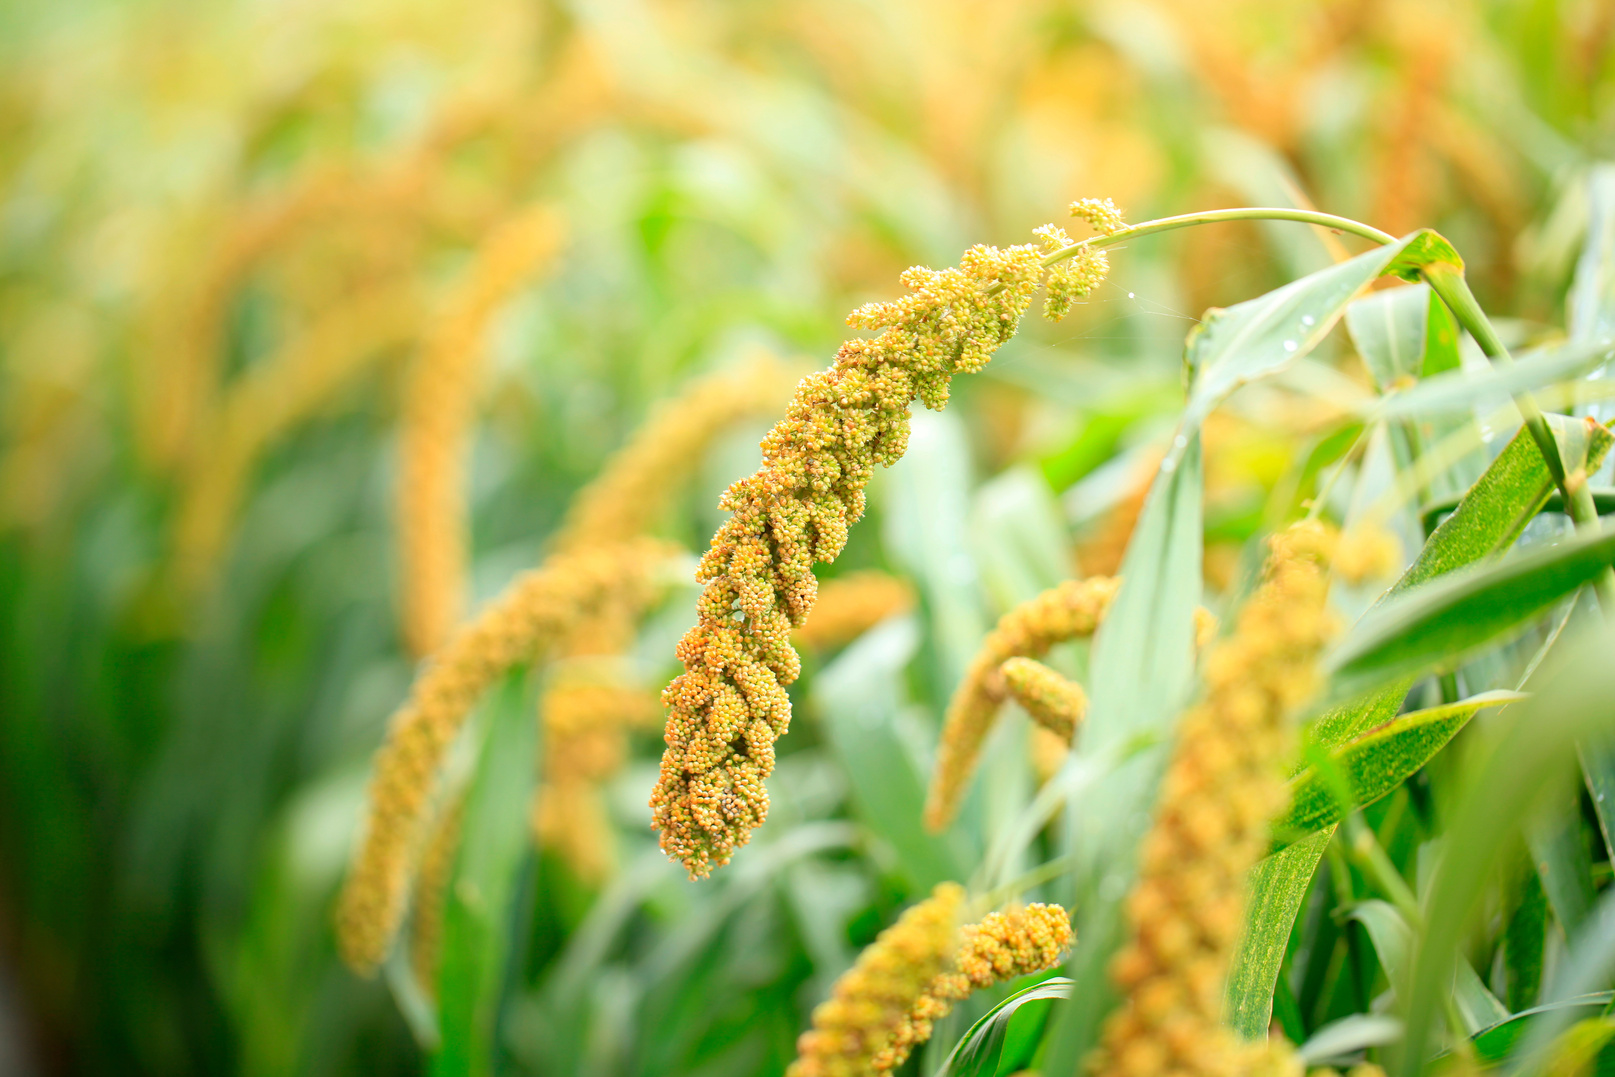 Foxtail millet, a very good option